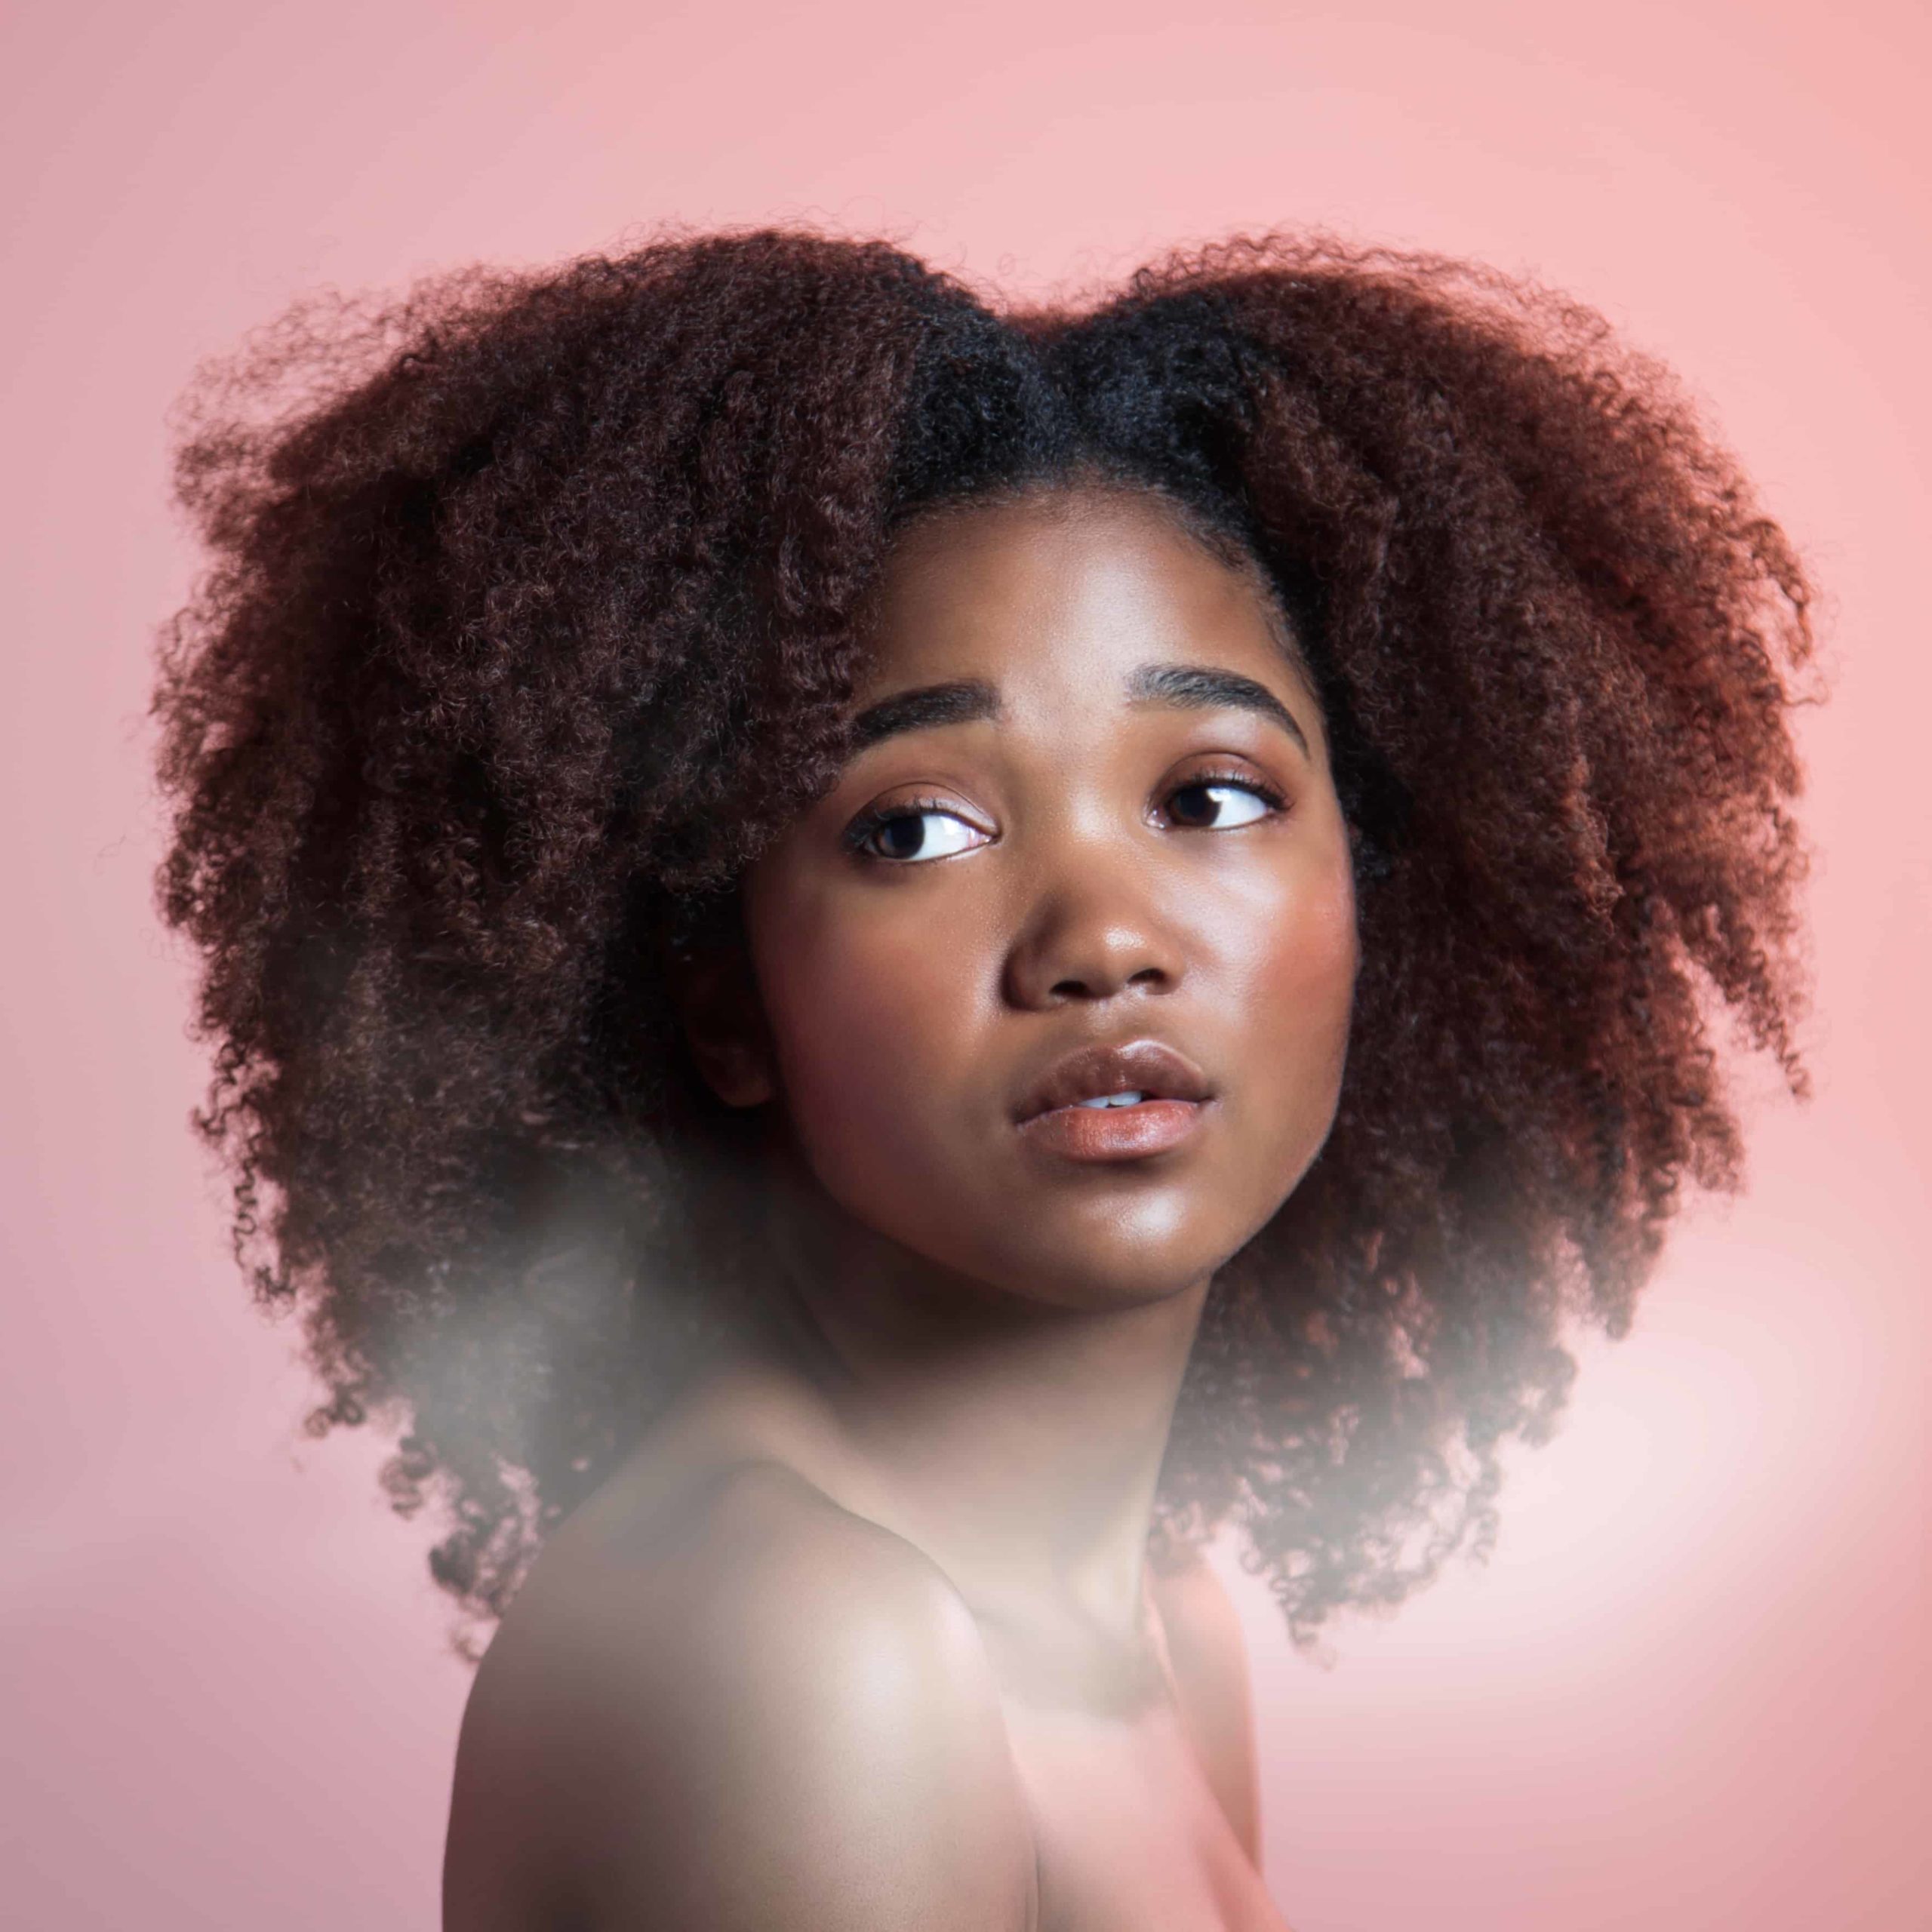 african american woman with natural curls looking at camera against a pink background